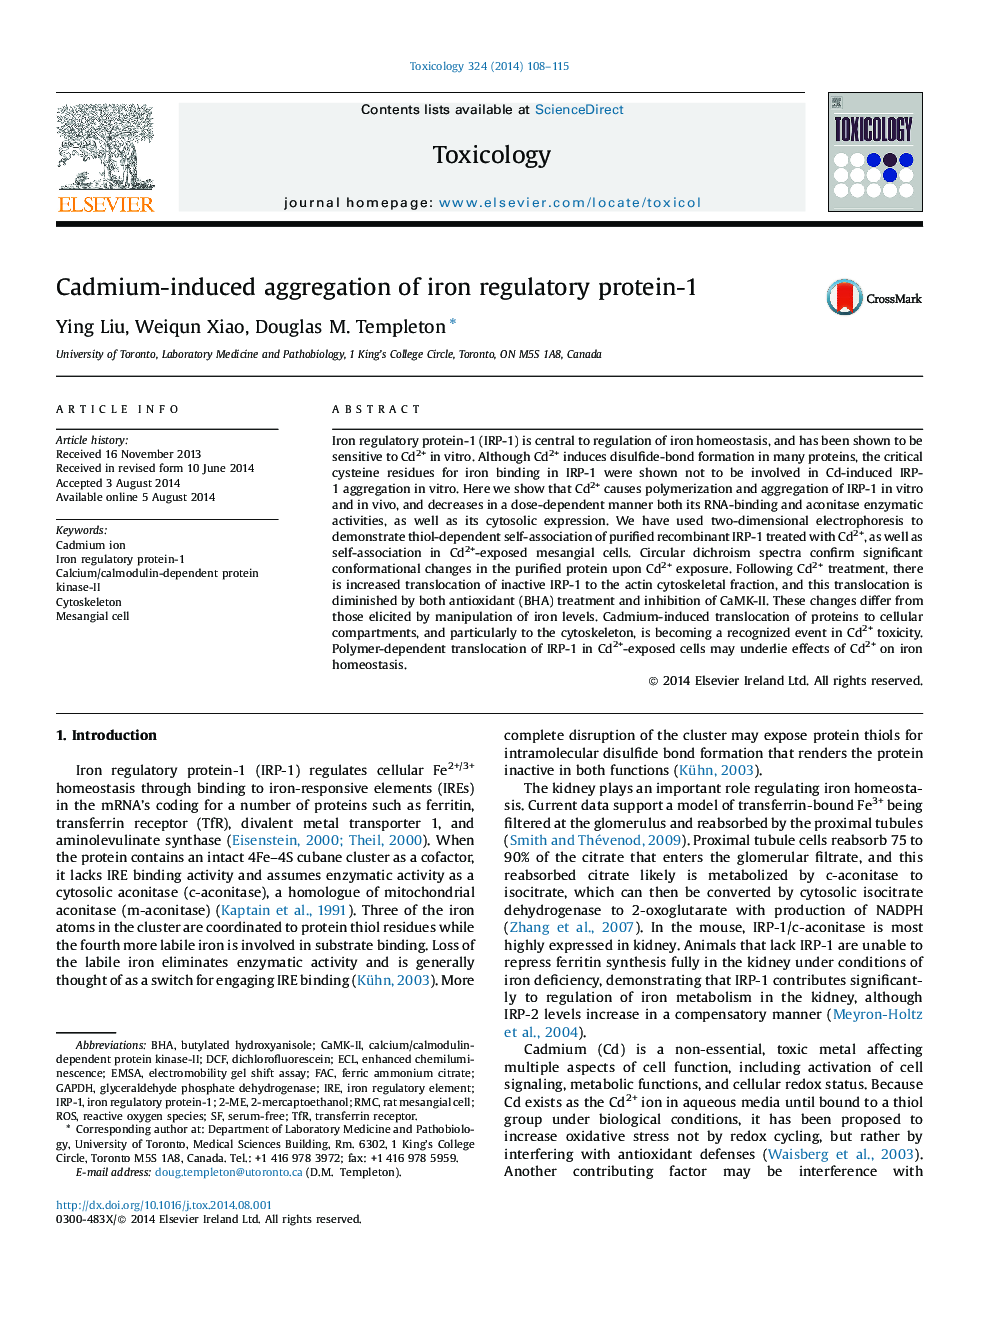 Cadmium-induced aggregation of iron regulatory protein-1